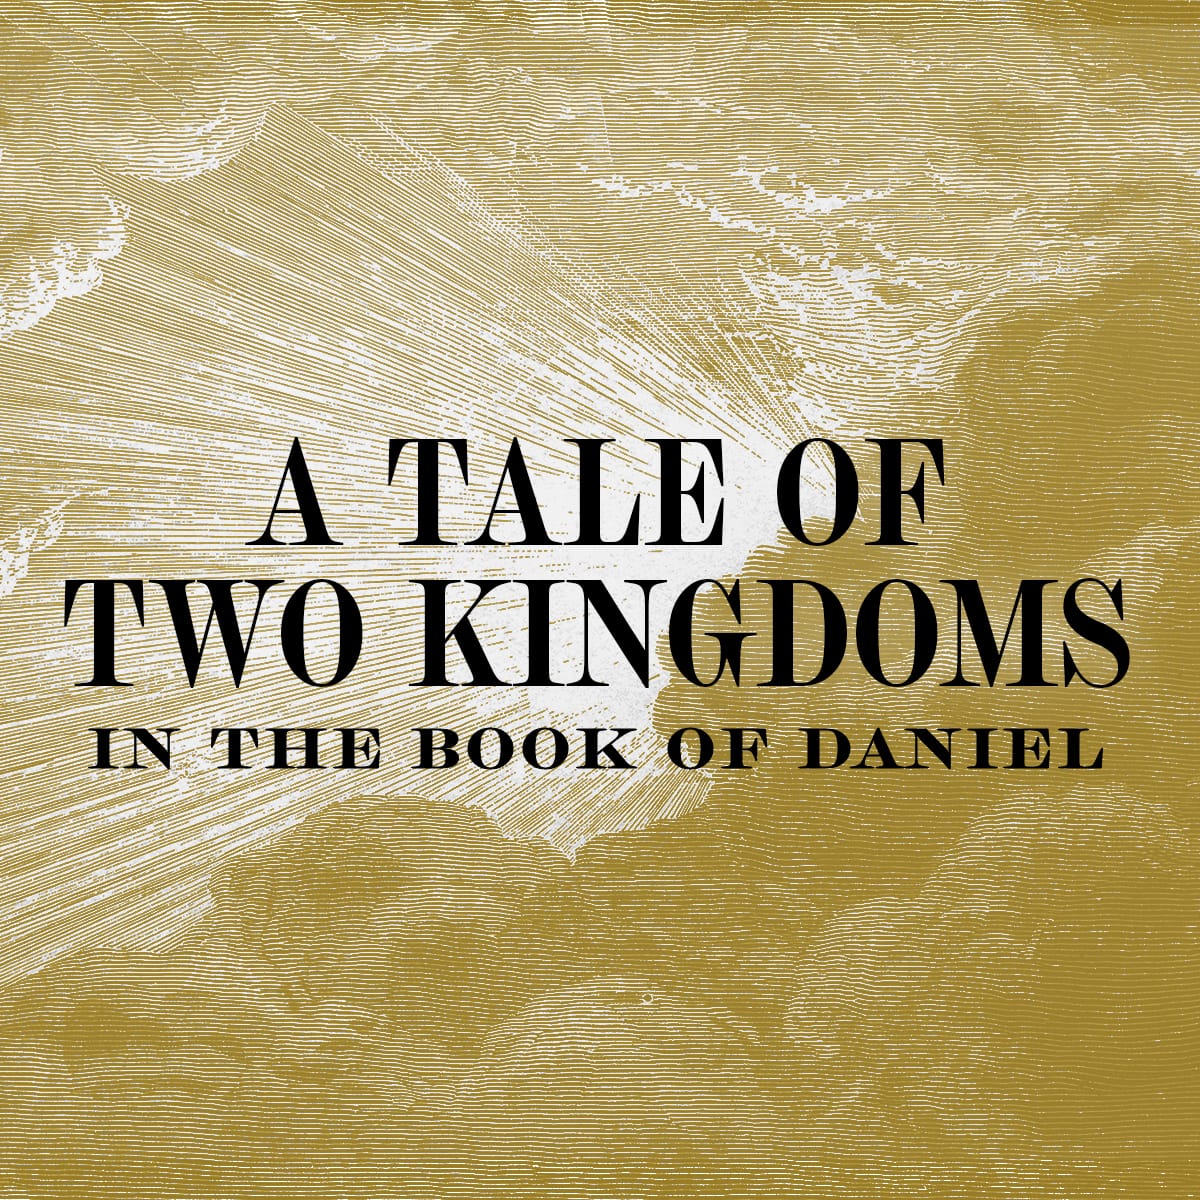 A Tale of Two Kingdoms in the Book of Daniel